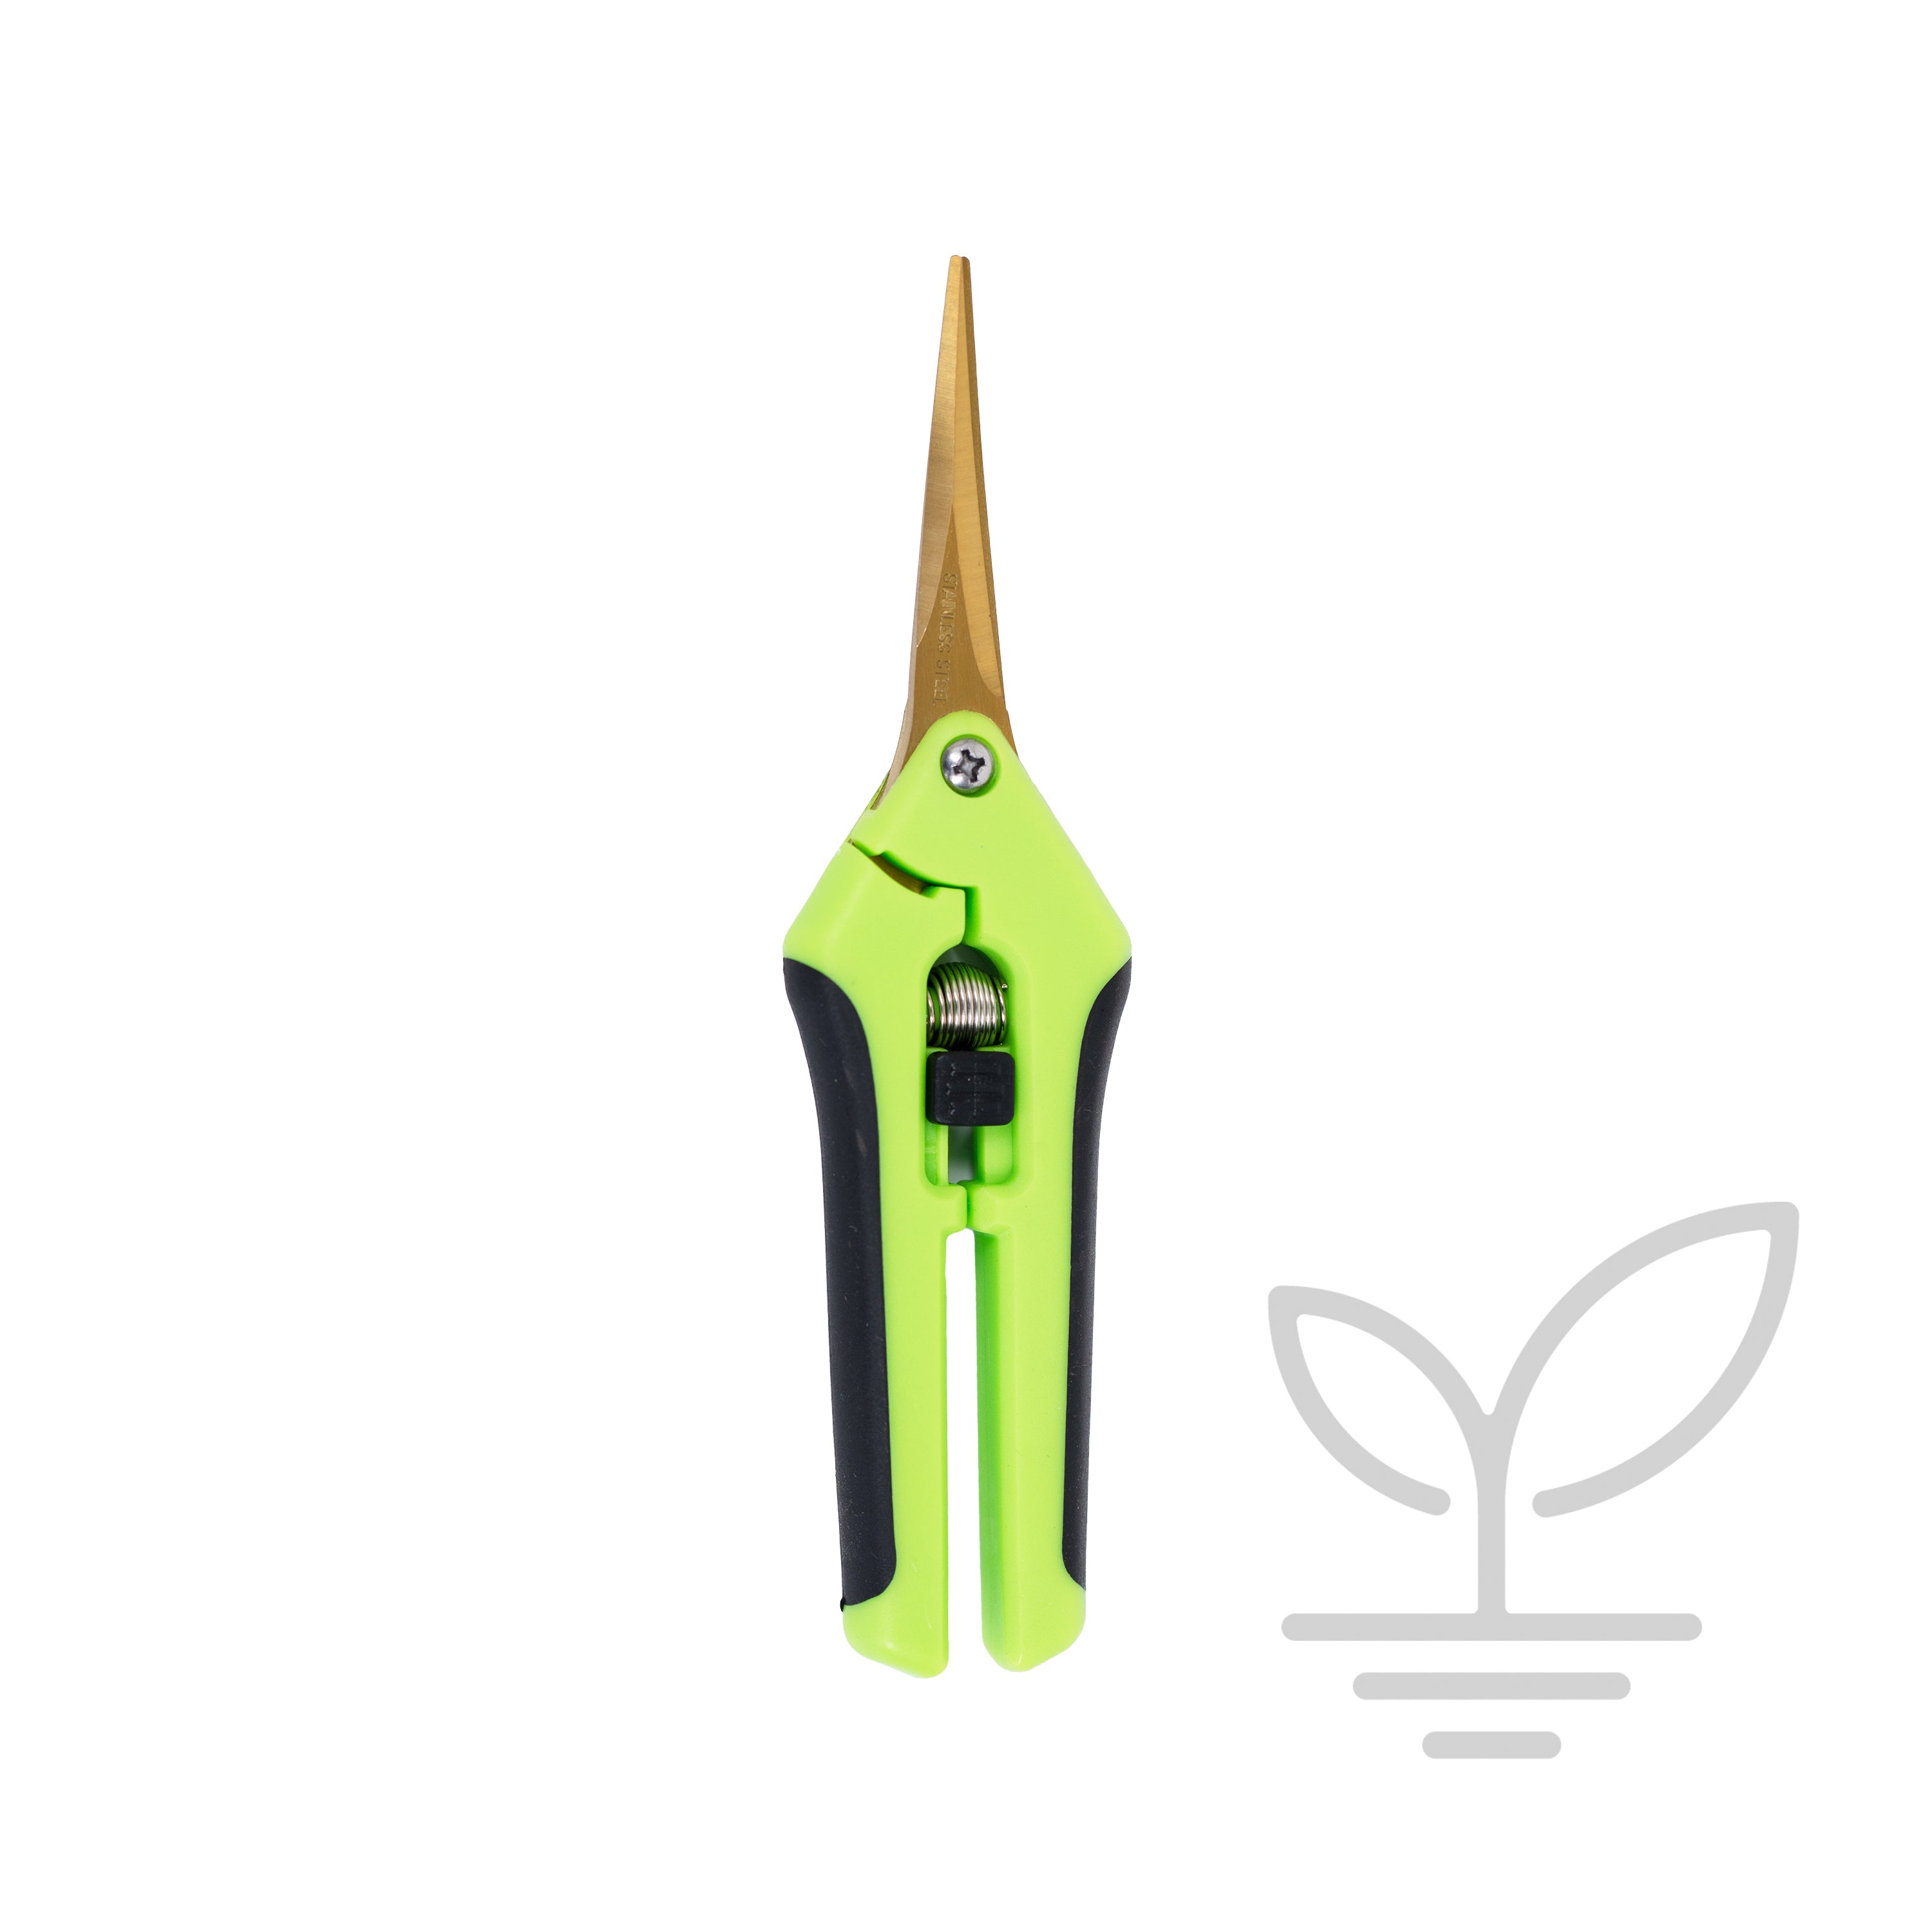 Teflon Coated Trimming Scissors - Curved Blade